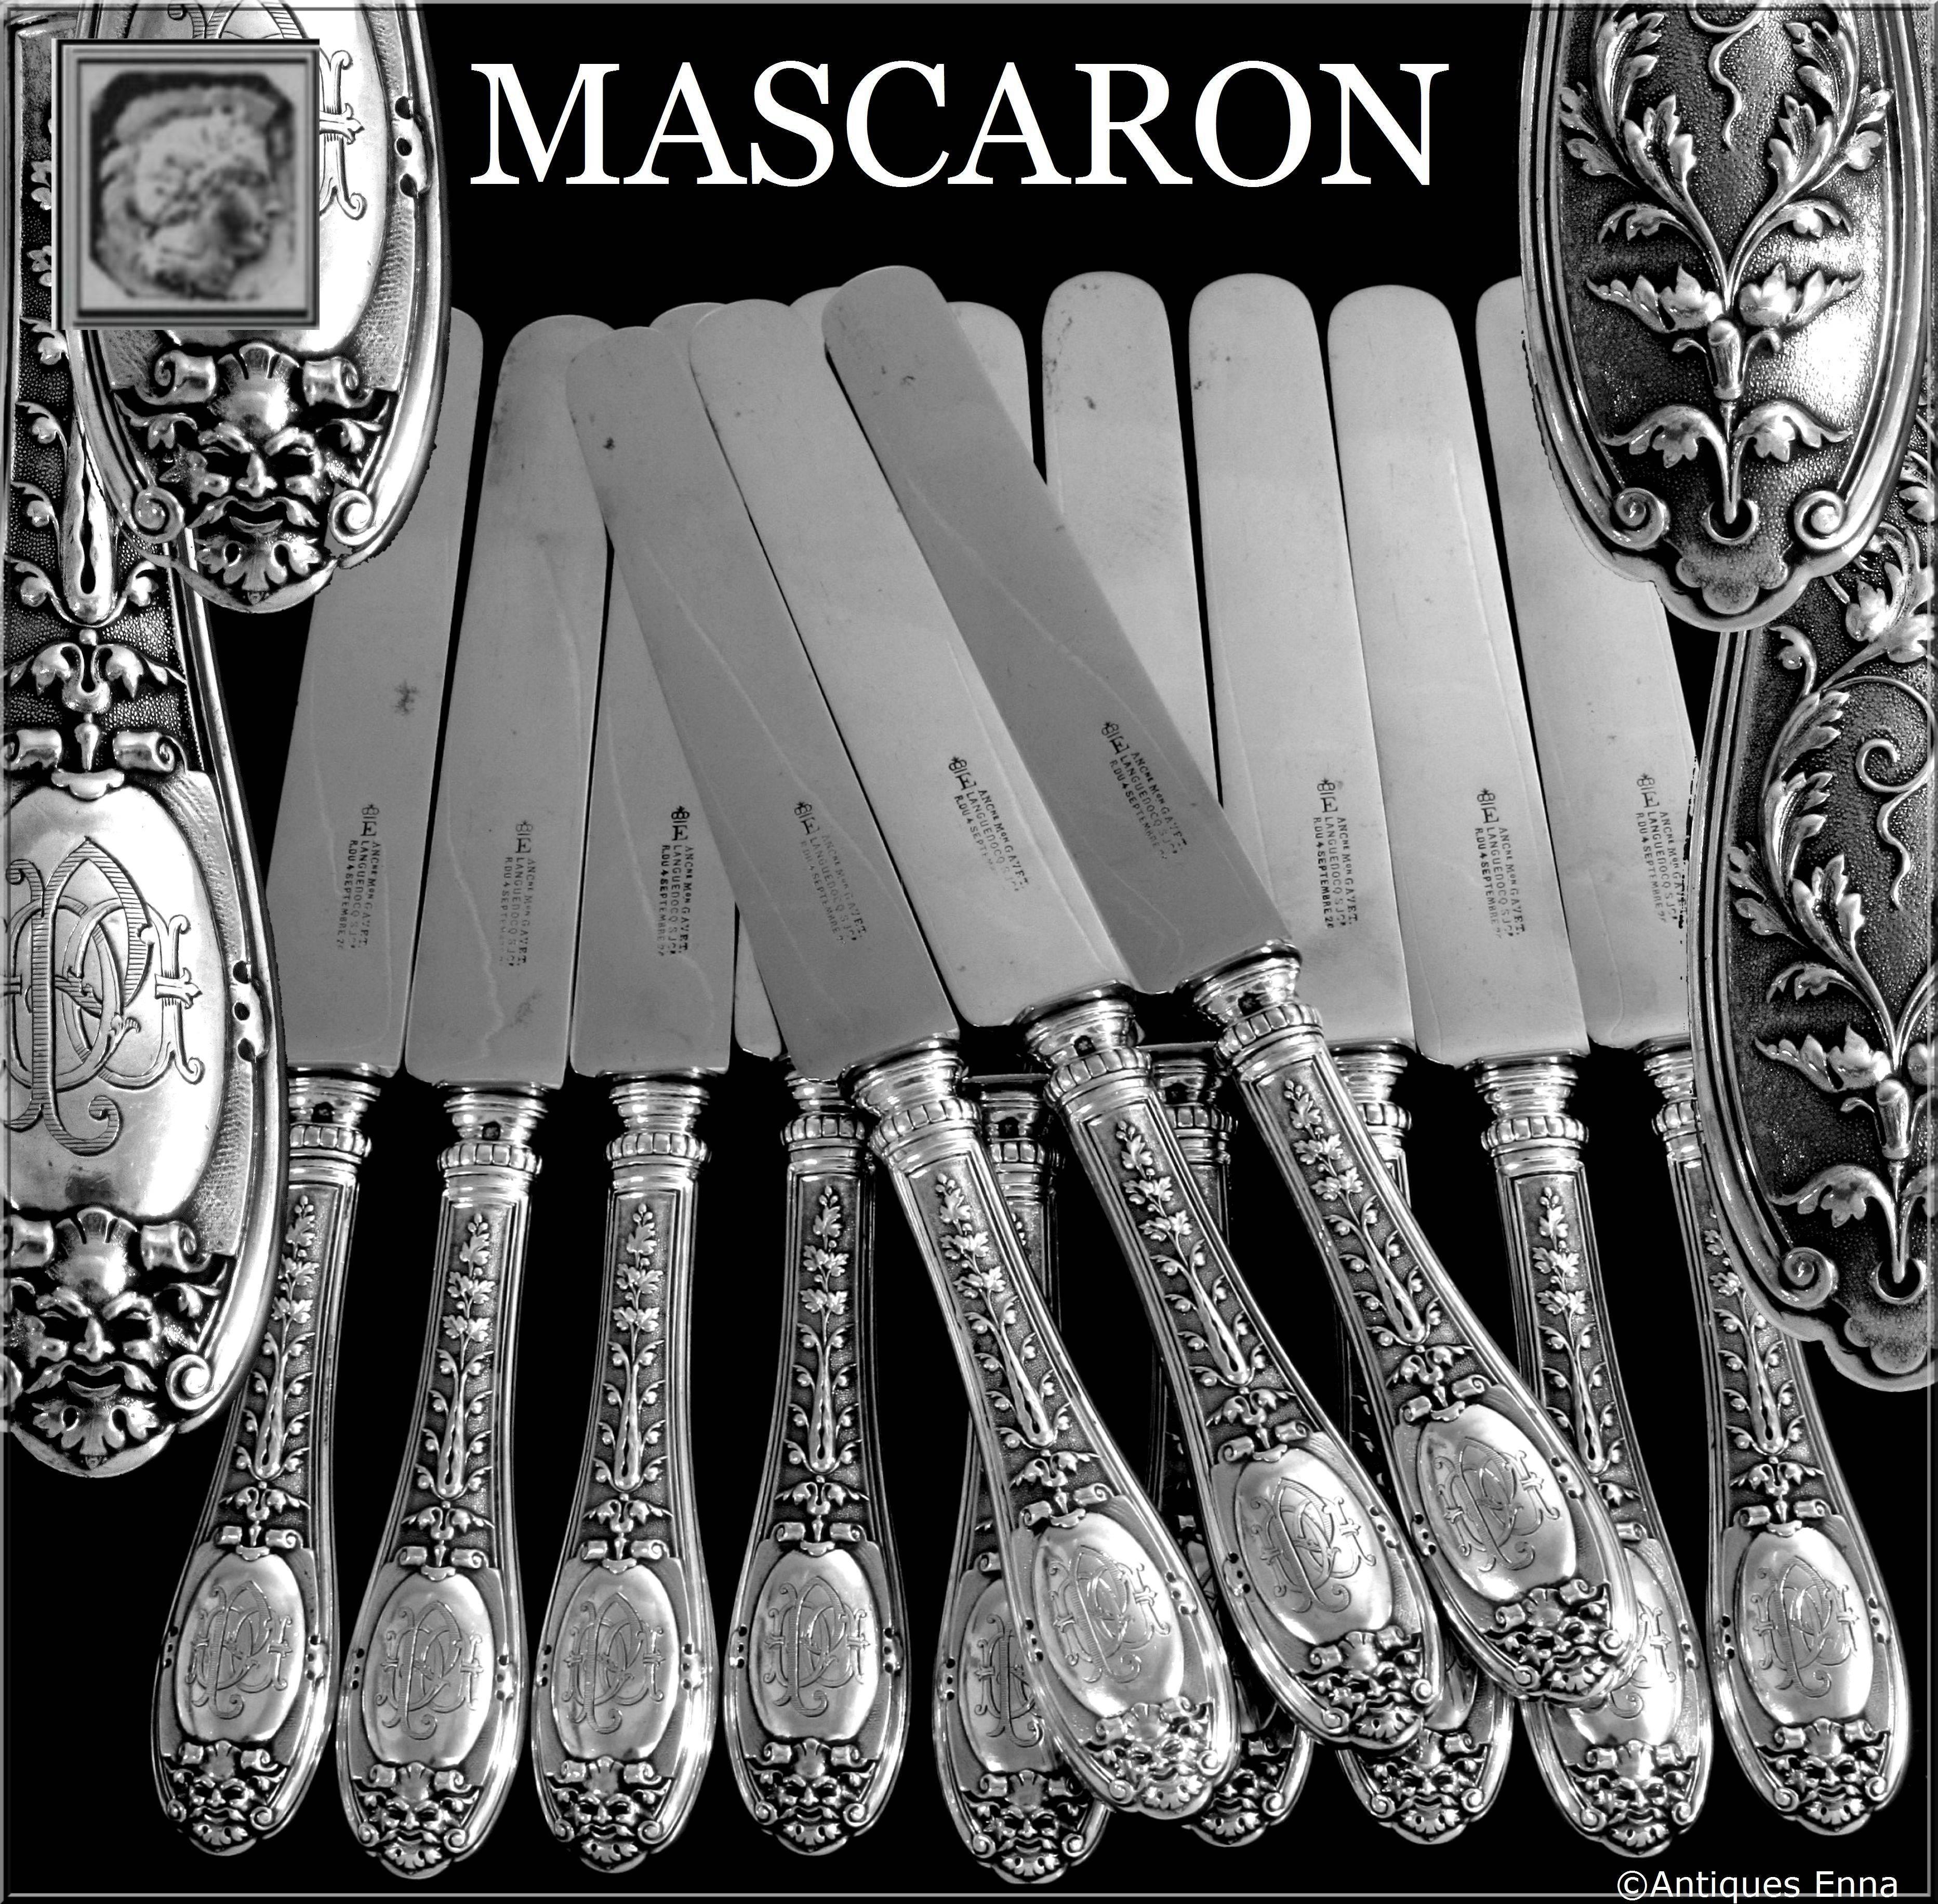 Henin Incredible French Sterling Silver Dinner Knife Set 12 pc Mascaron

Handles have fantastic decoration in the Renaissance style on a stippled backround on one side and decorated with Mascaron & foliages on the other side. Dinner knife set with